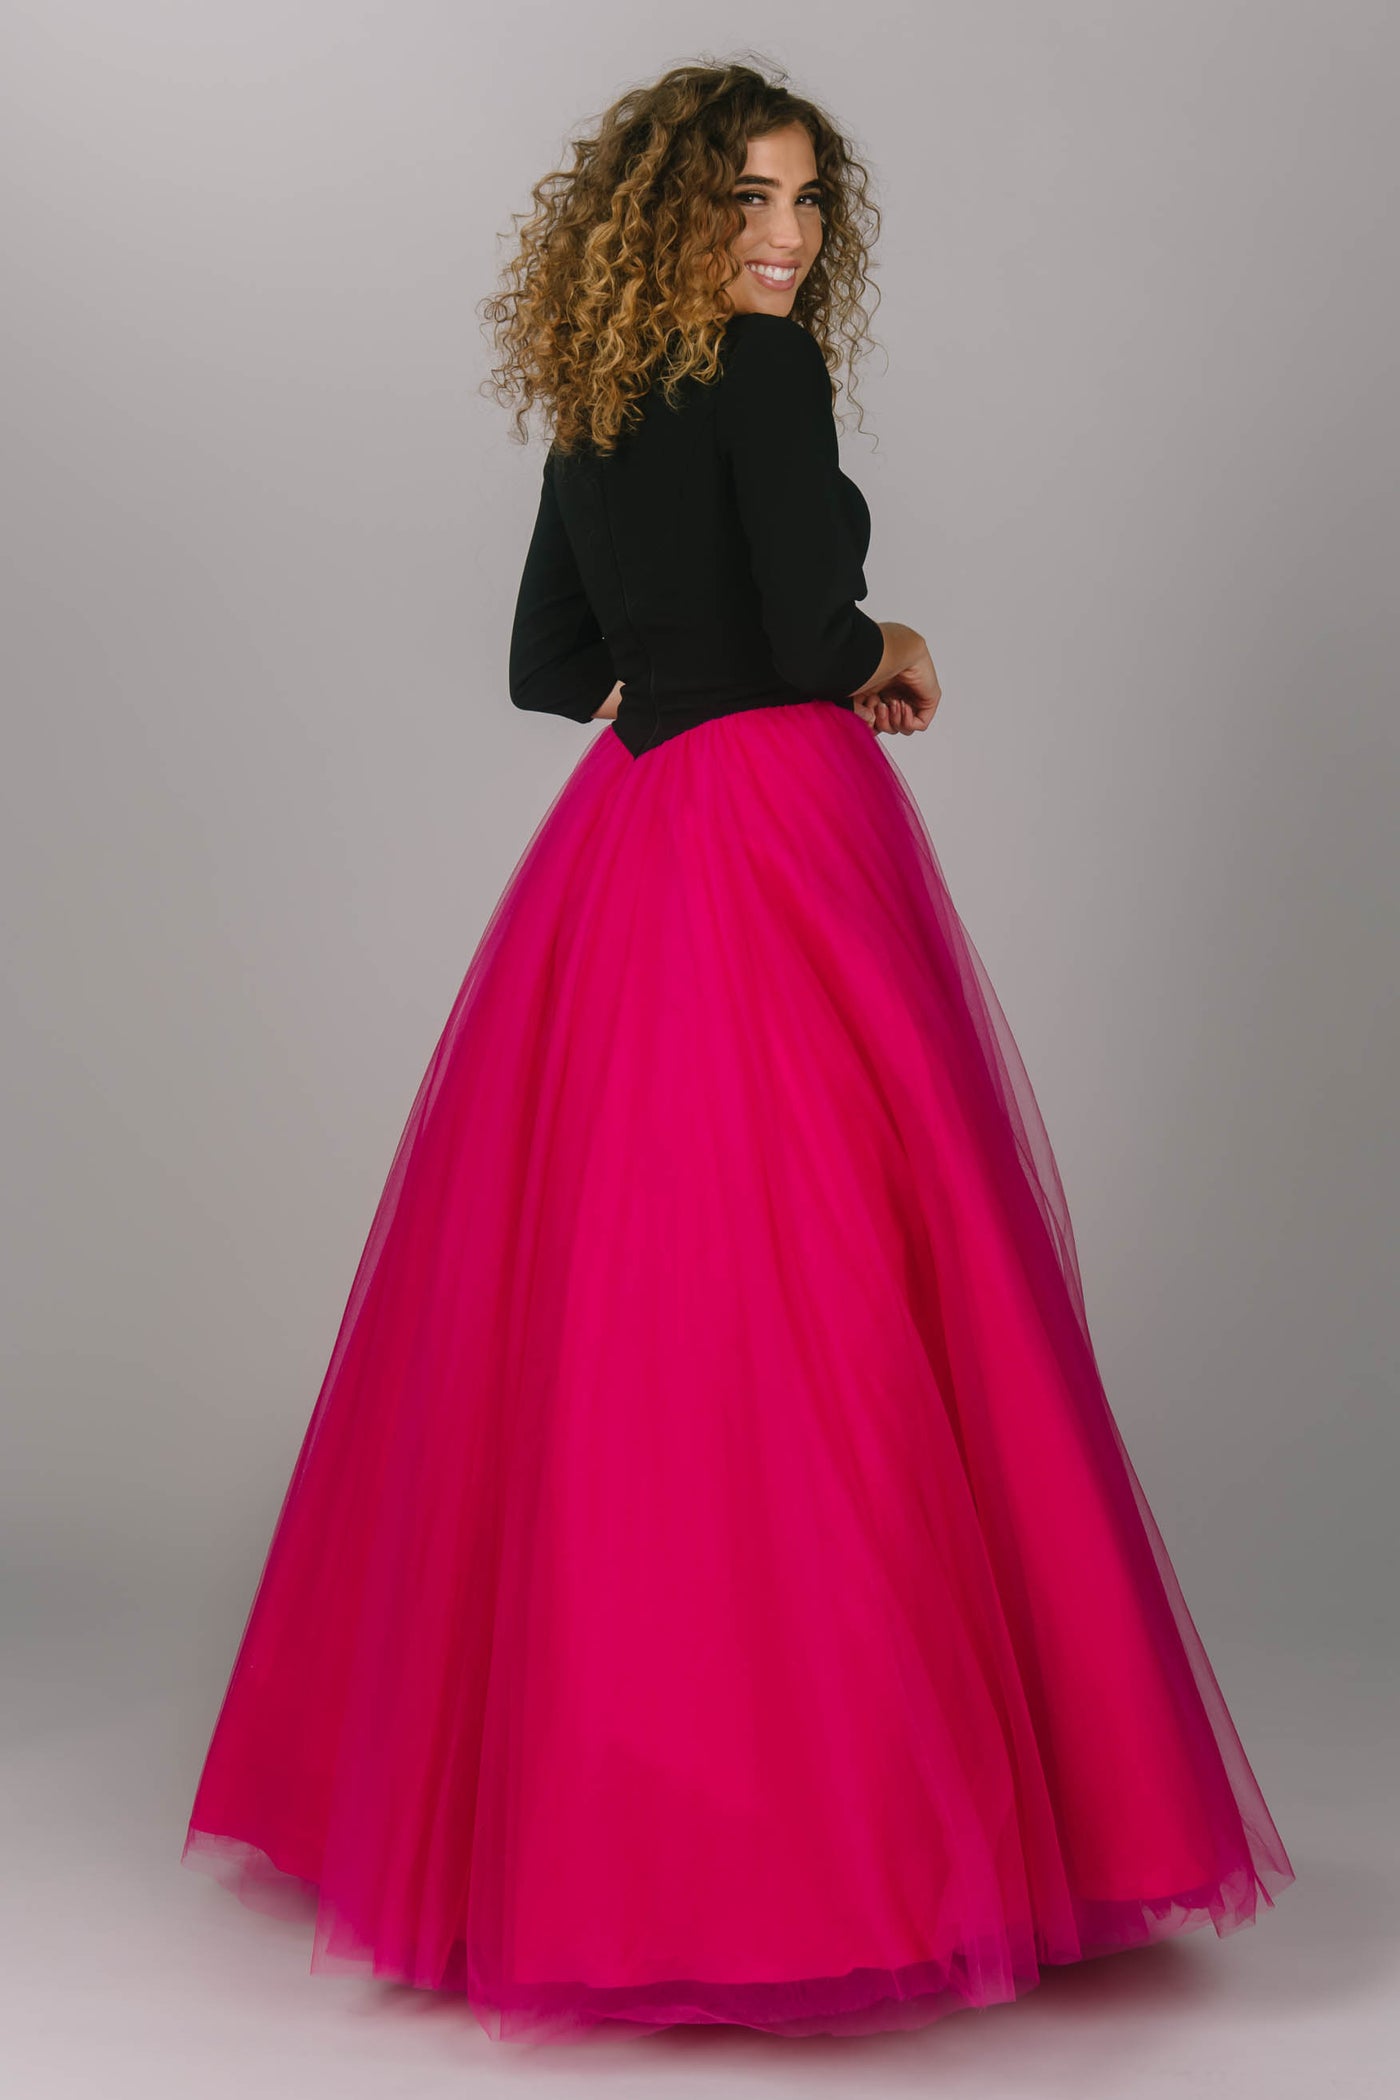 Modest prom ballgown with pink tulle skirt and black top. Sleeves are quarter length and it has a high scoop neckline. This is the perfect modest prom ballgown.